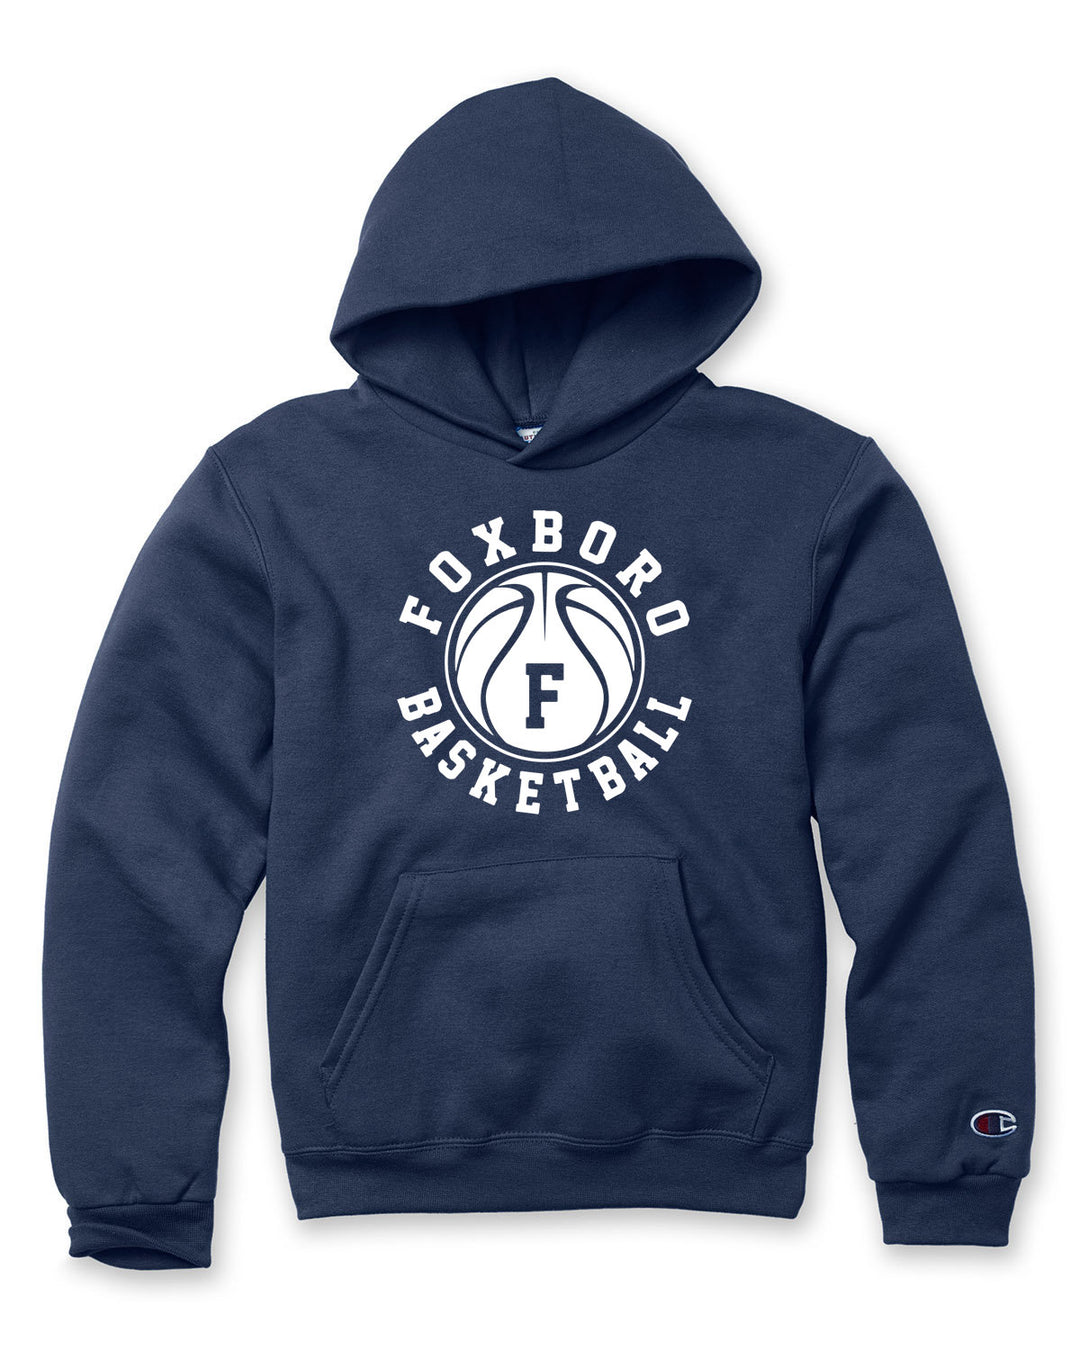 Foxboro Youth Basketball Champion Youth Powerblend Pullover Hooded Sweatshirt (S790)